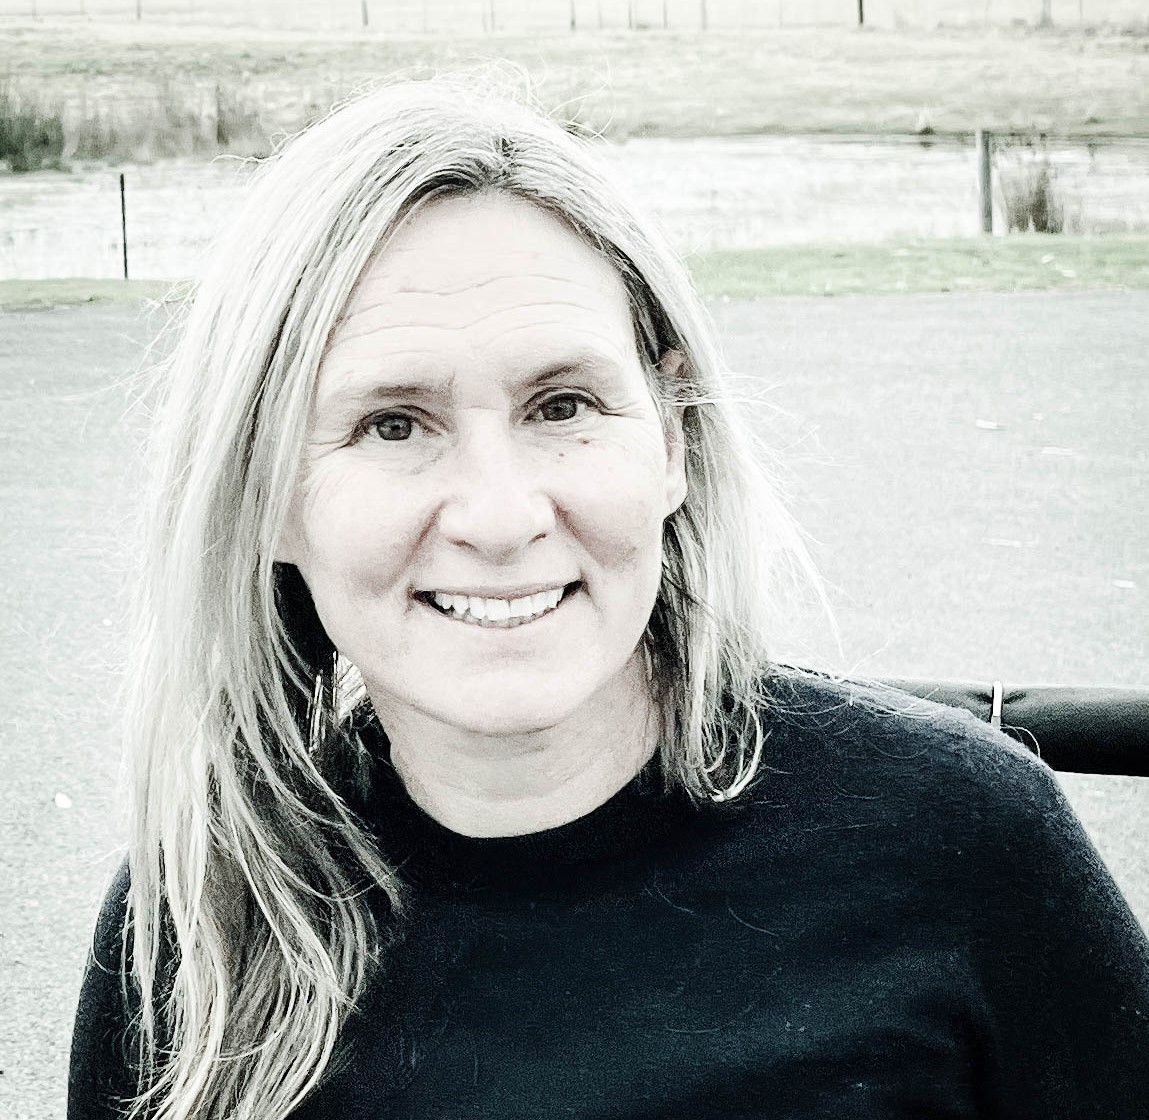 Image of Lisa Stafford wearing a black jumper and smiling. Lisa has long blond hair. The background is farm land. 